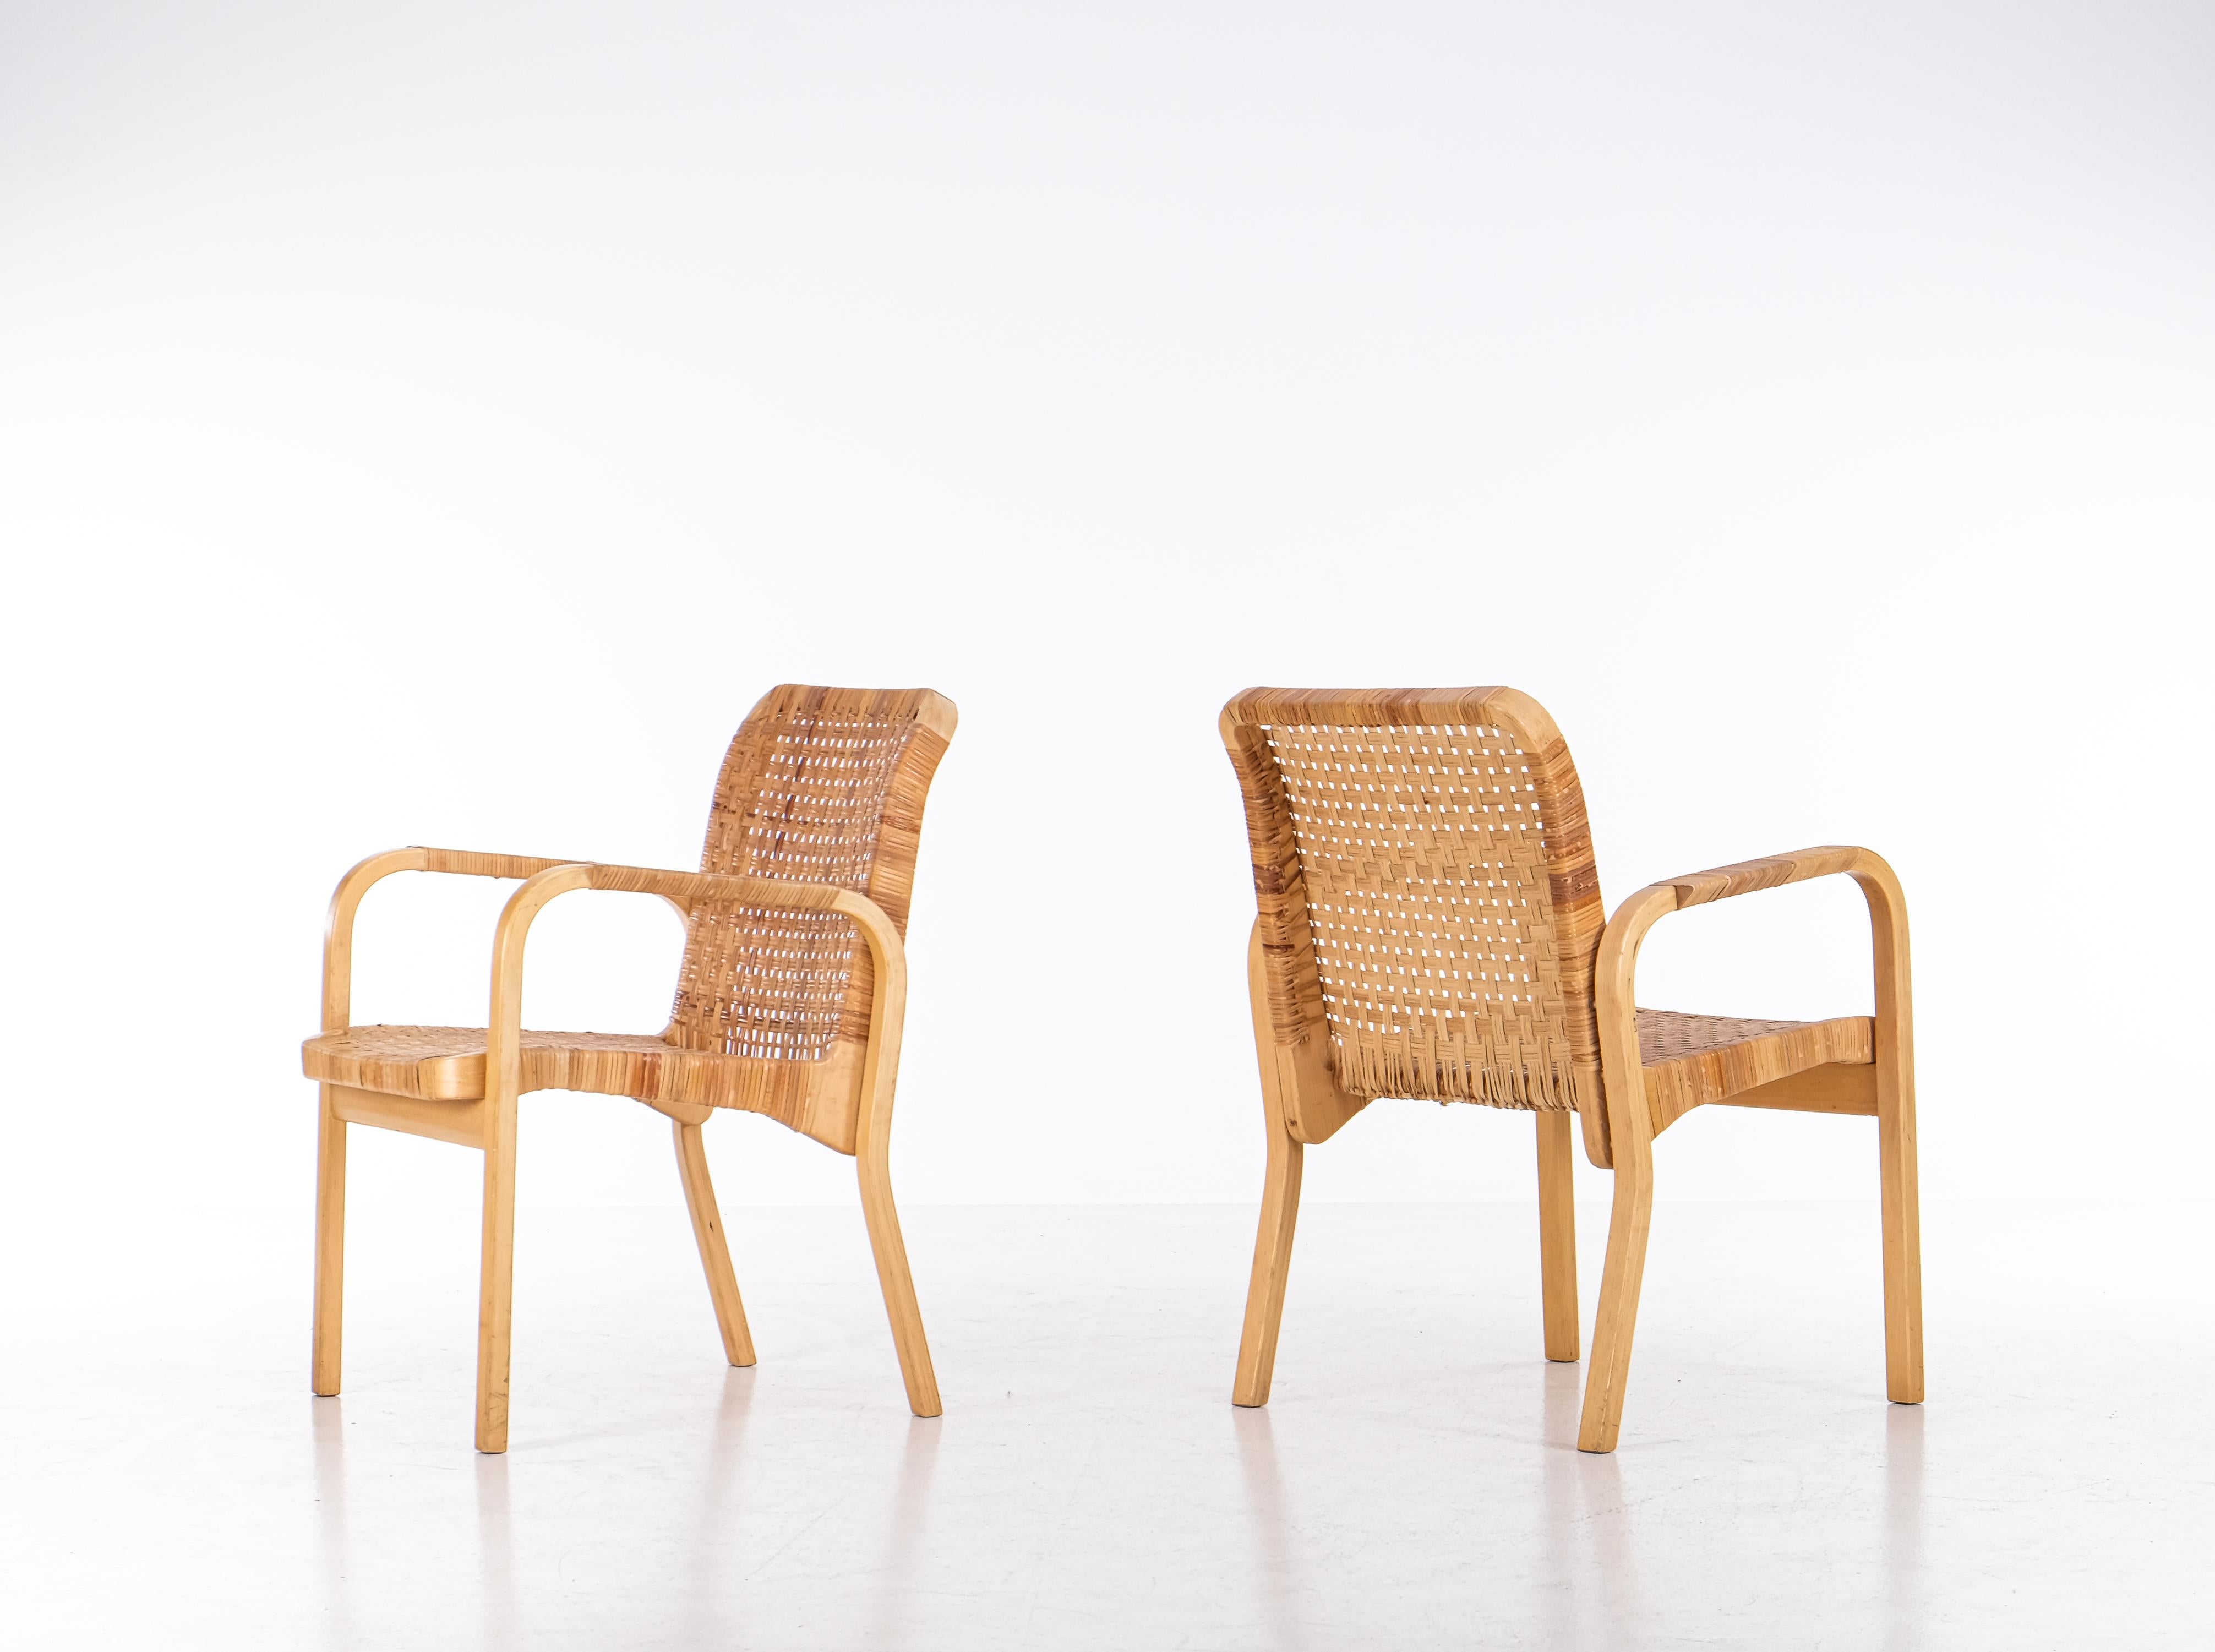 Produced during the 1970s by Artek, Finland. 
Good vintage condition with signs of patina and usage.